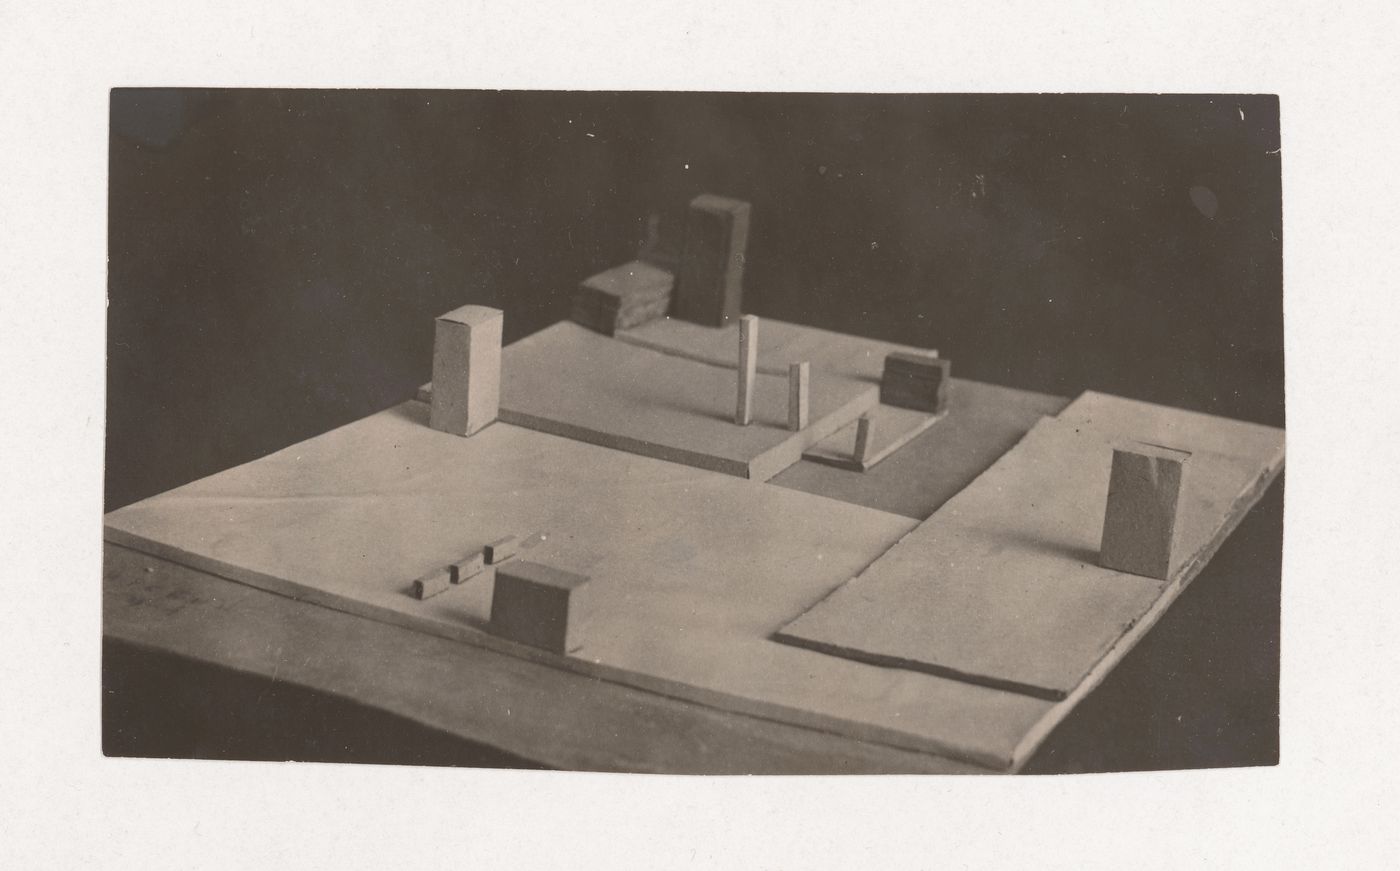 Photograph of a student model on the topic "Organization of Space in a Rectangular Area" for the "Space" course at the Vkhutemas (Higher State Artistic Technical Studios), Moscow